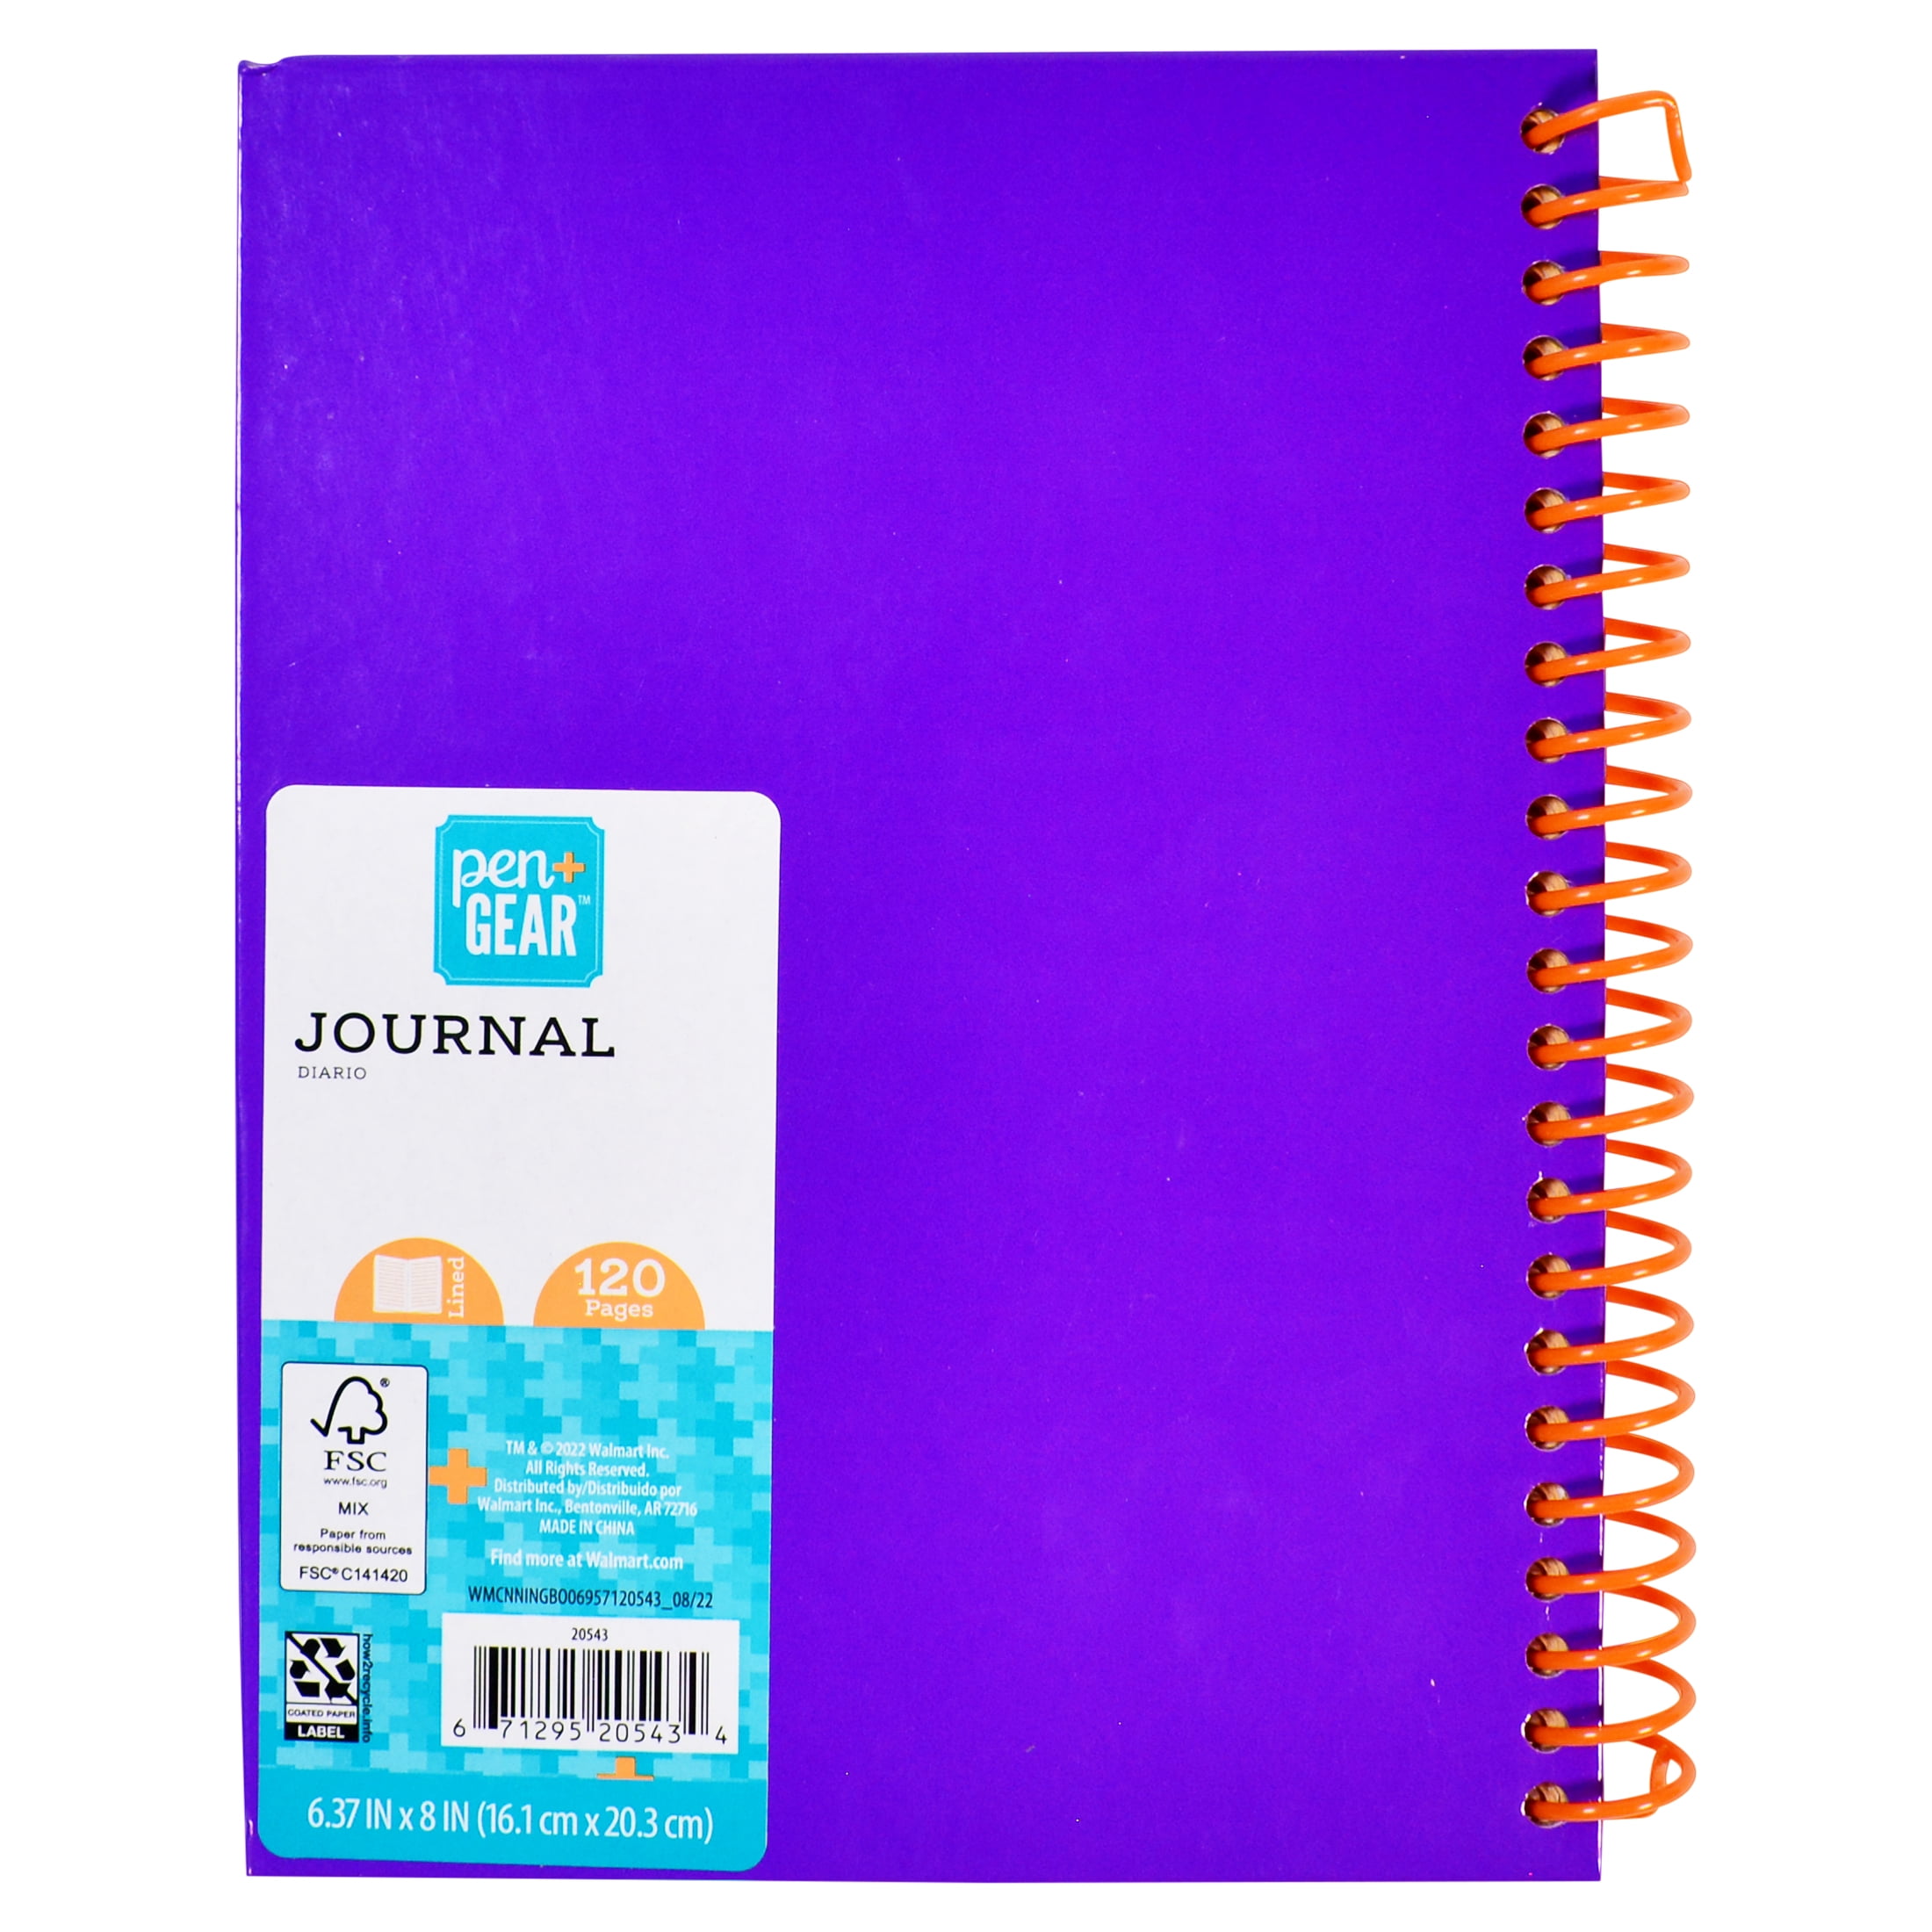 Wholesale Kawaii Pu Cover Notebook With 224 Pages For DIY, Sketching, And  Journaling Line/Dot Design, Ideal For School Supplies And Weekly Journal,  Swollen Hands And Feet Account Included From Dressingirl, $13.15